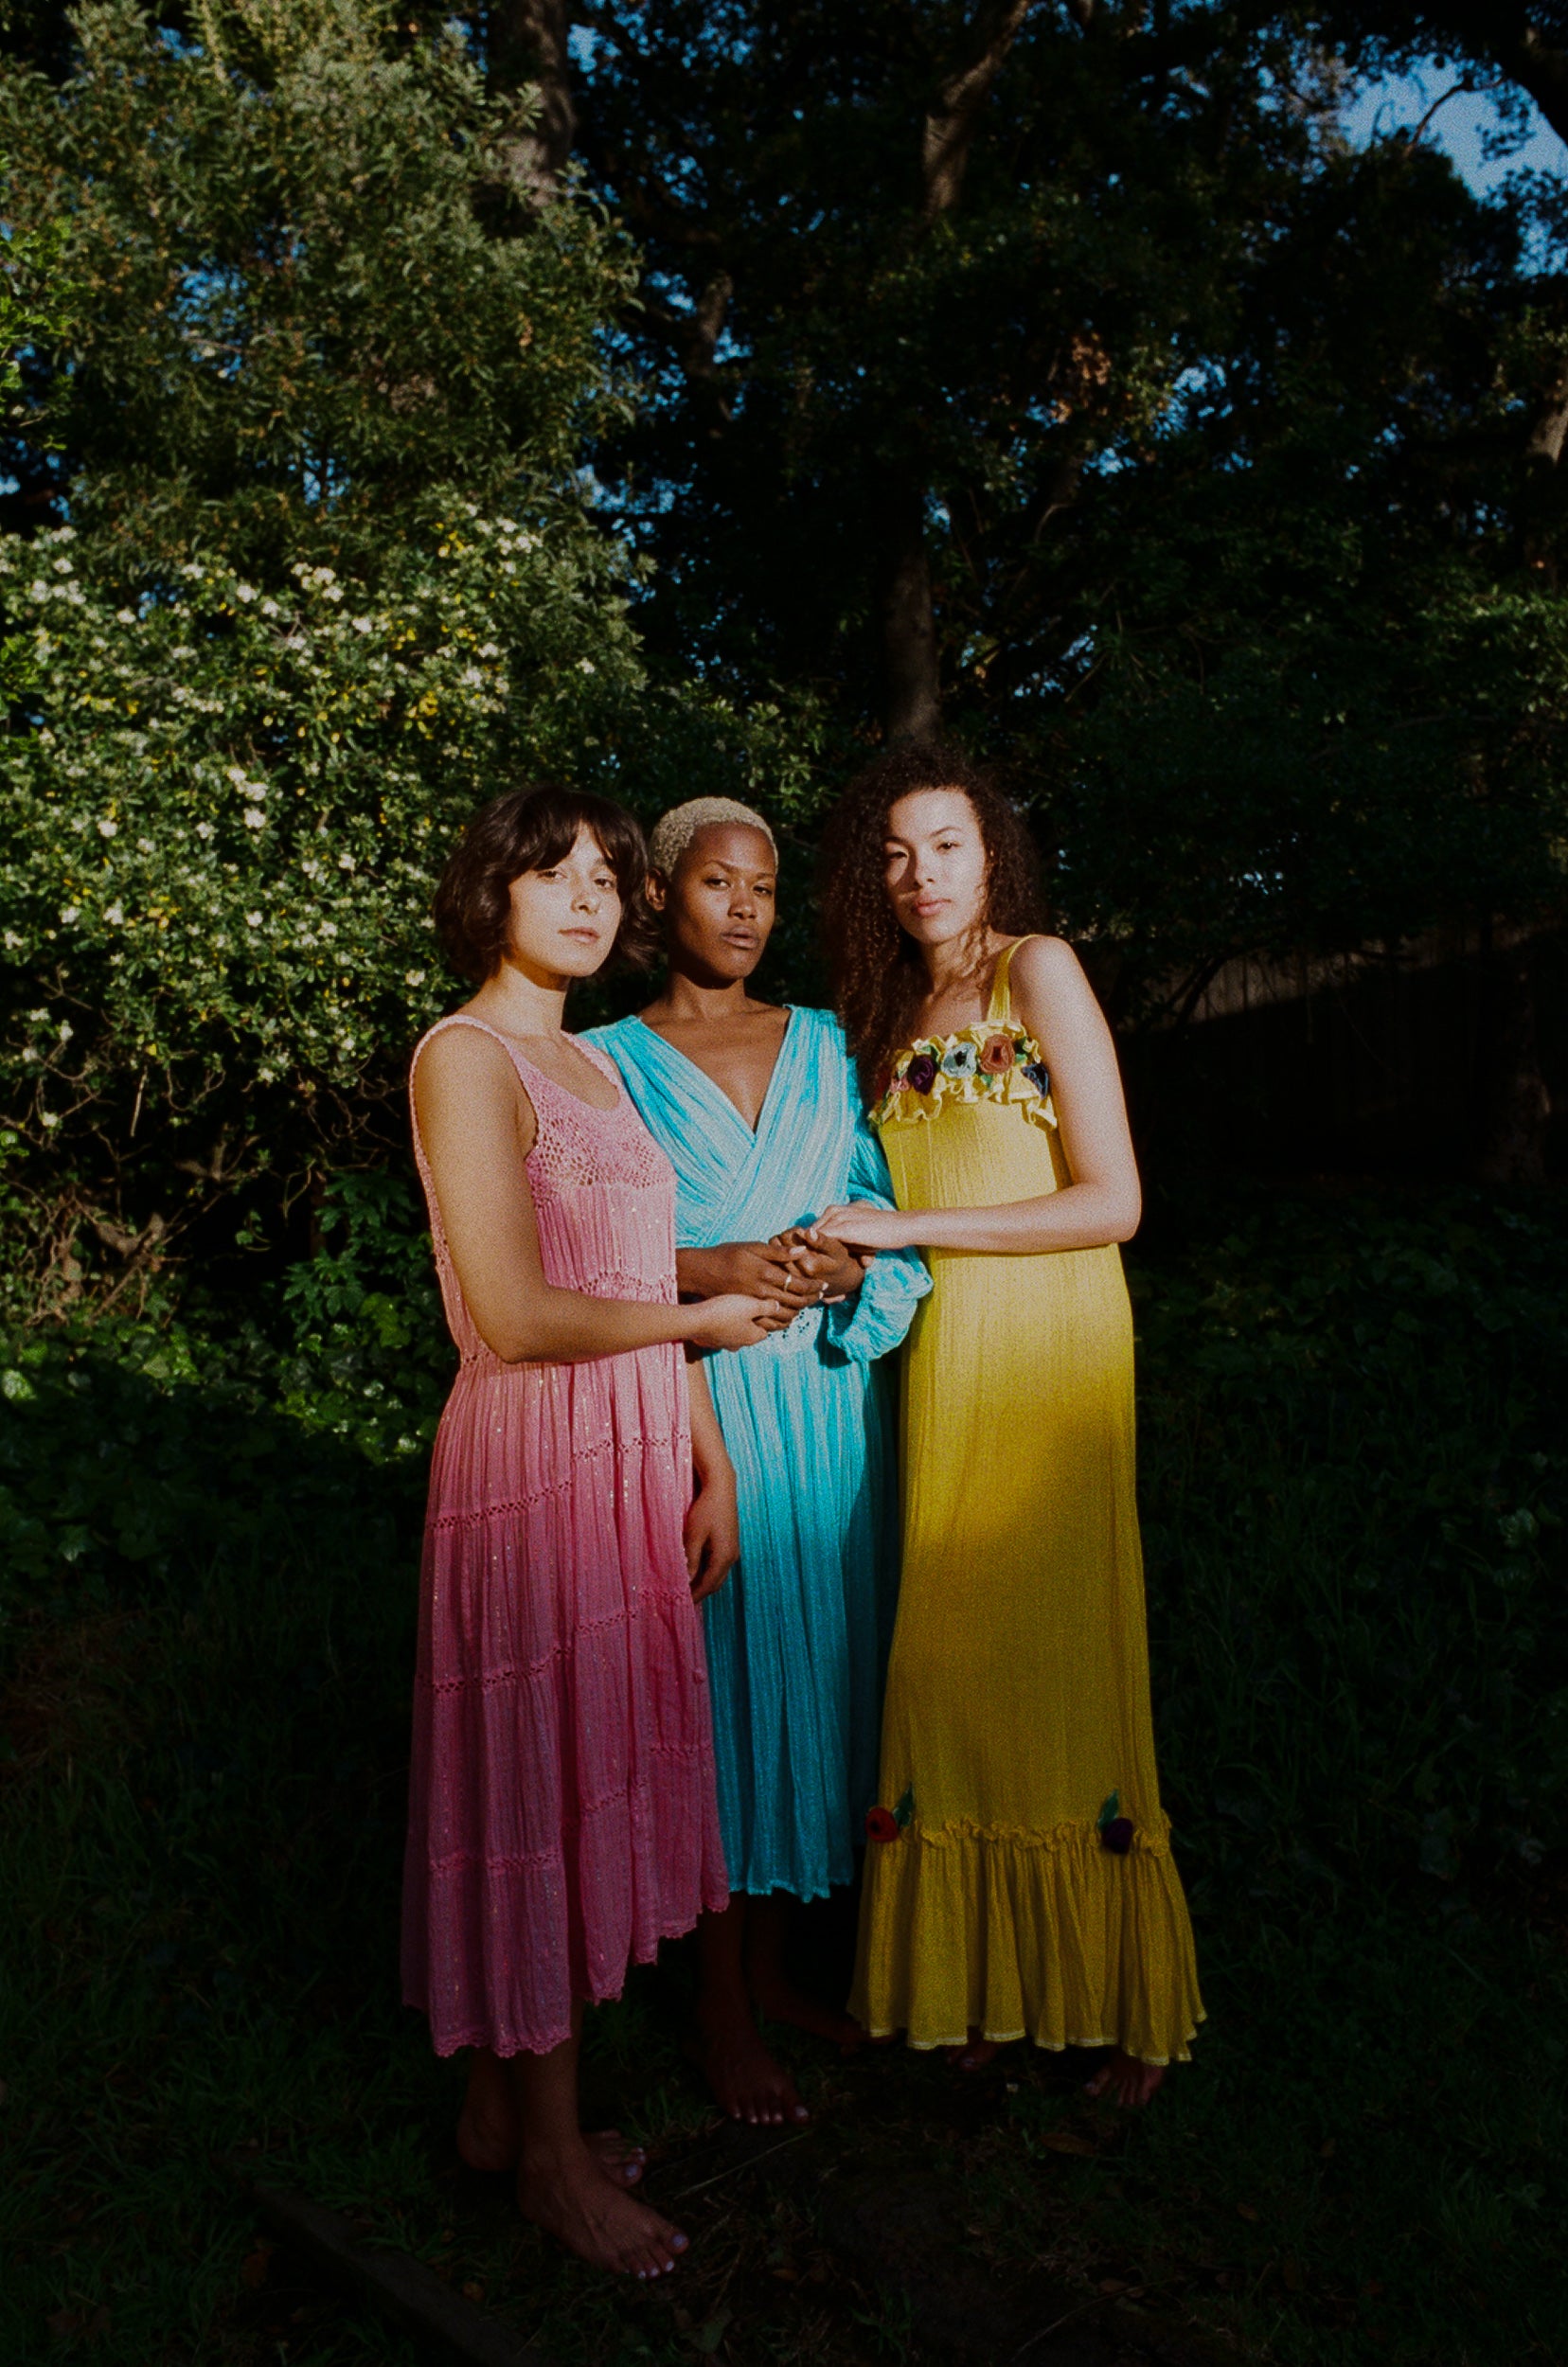 Queens in Empress Vintage, shot by Laila Bahman and styled by Janina Angel Bath for Empress Vintage.